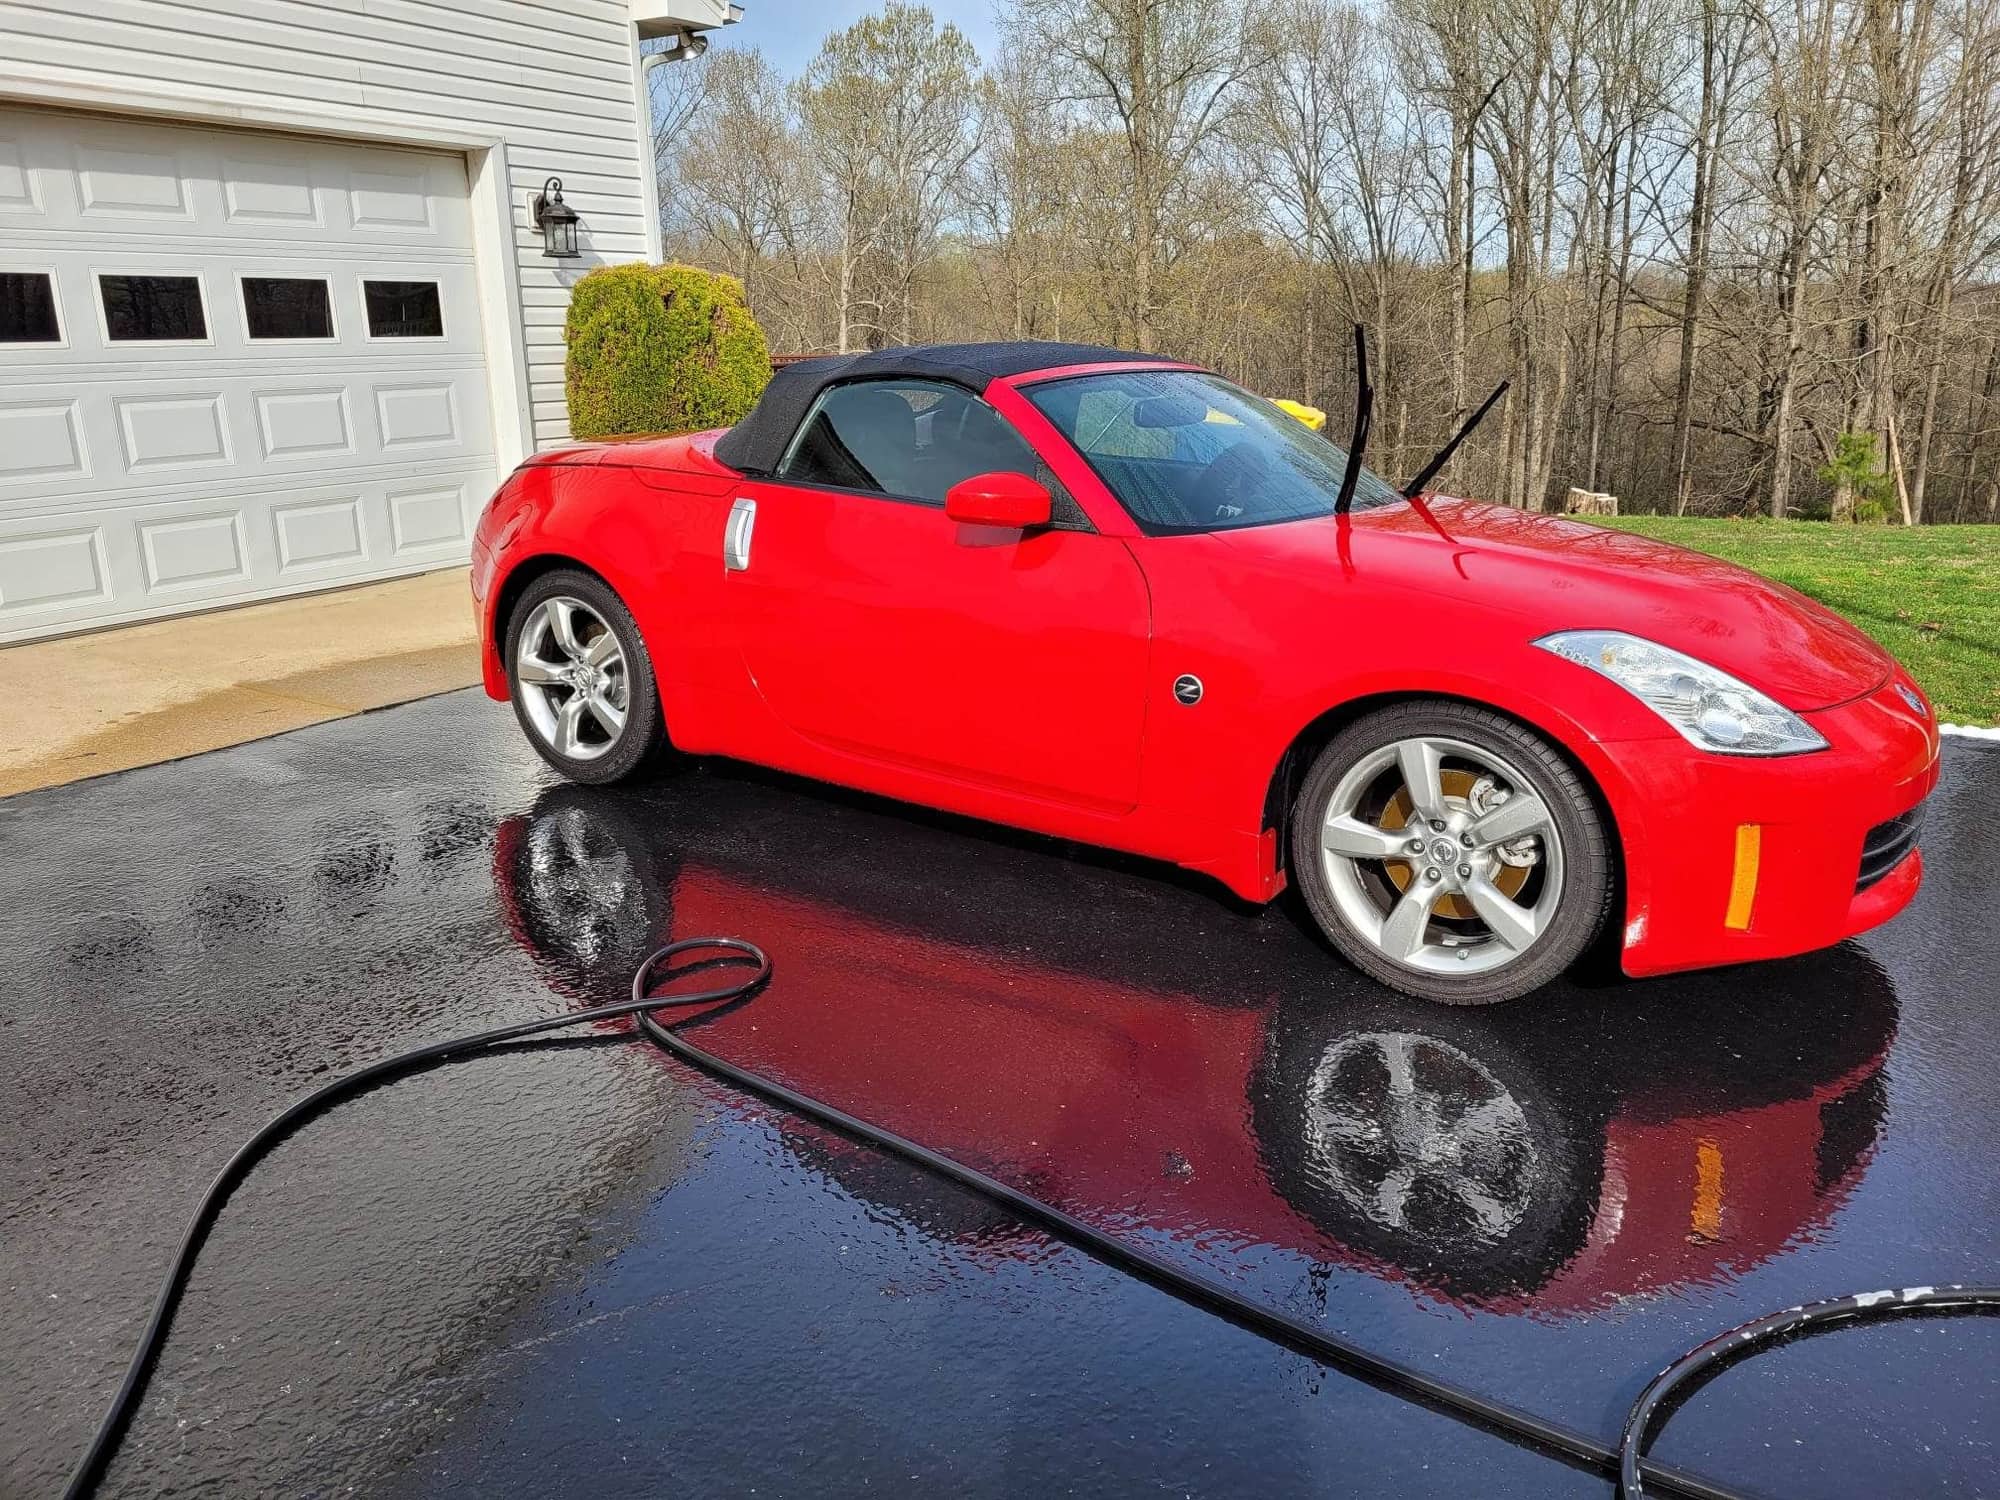 2007 Nissan 350Z - 2007 350z convertible roadster - Used - VIN JNB1B236A17M65387 - 52,000 Miles - 6 cyl - 2WD - Automatic - Convertible - Red - Russellville, KY 42276, United States